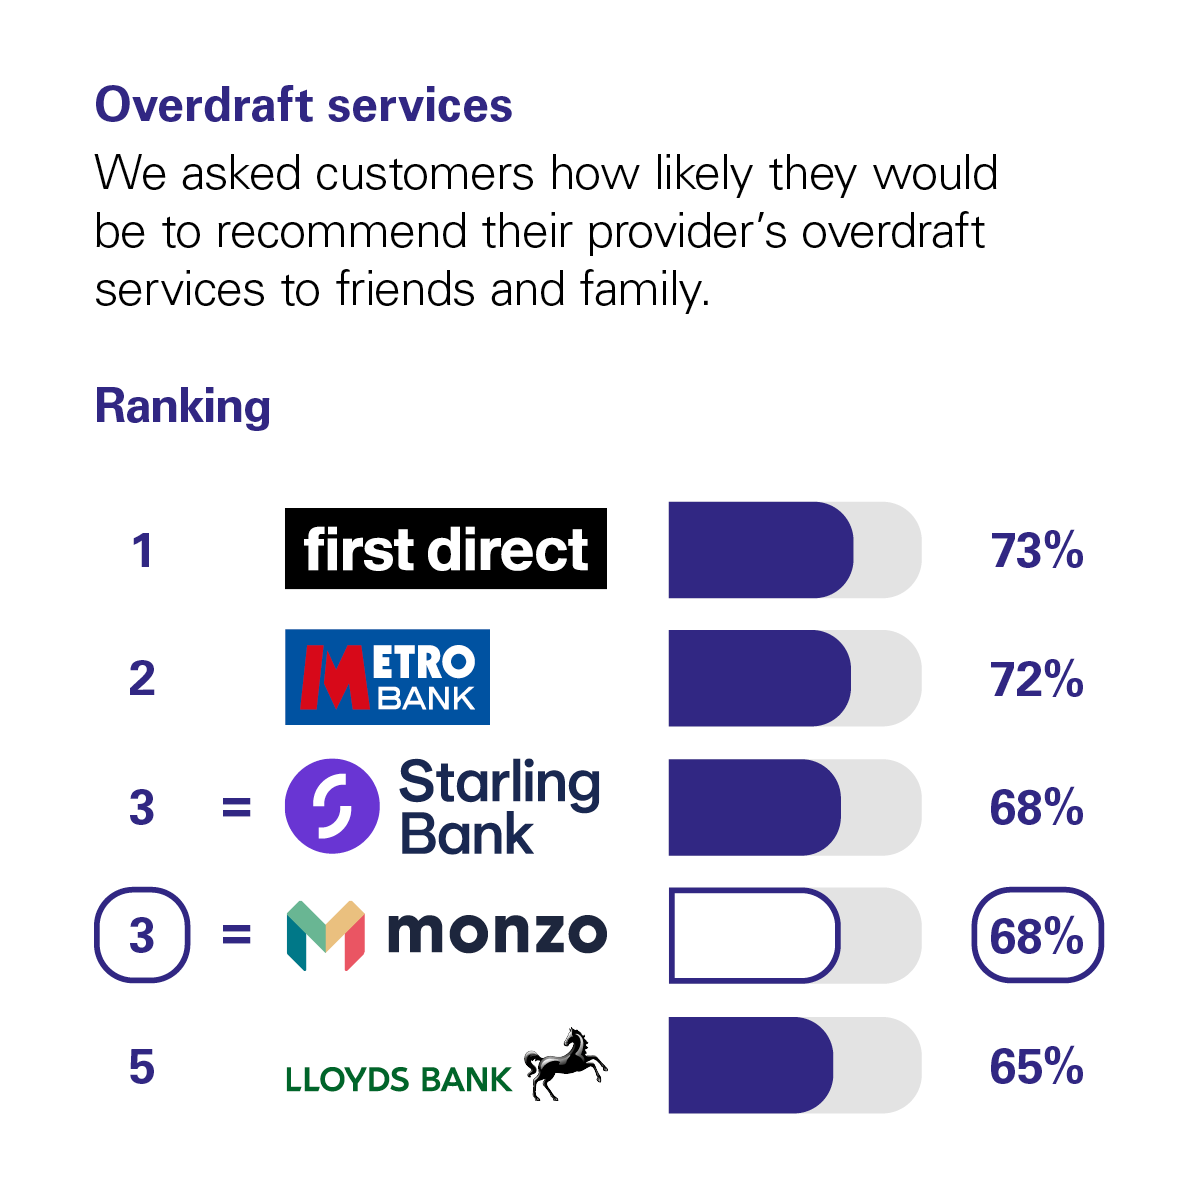 Graph showing the results of the CMA scoring of UK banks in the Overdraft Services category. The CMA asked customers how likely they would be to recommend their provider's overdraft services to friends and family. The rankings with percentage scores are: 1st First Direct with 73%. 2nd Metro Bank with 72%. Joint 3rd are Starling Bank and Monzo with 68%. 5th Lloyds Bank with 65%.